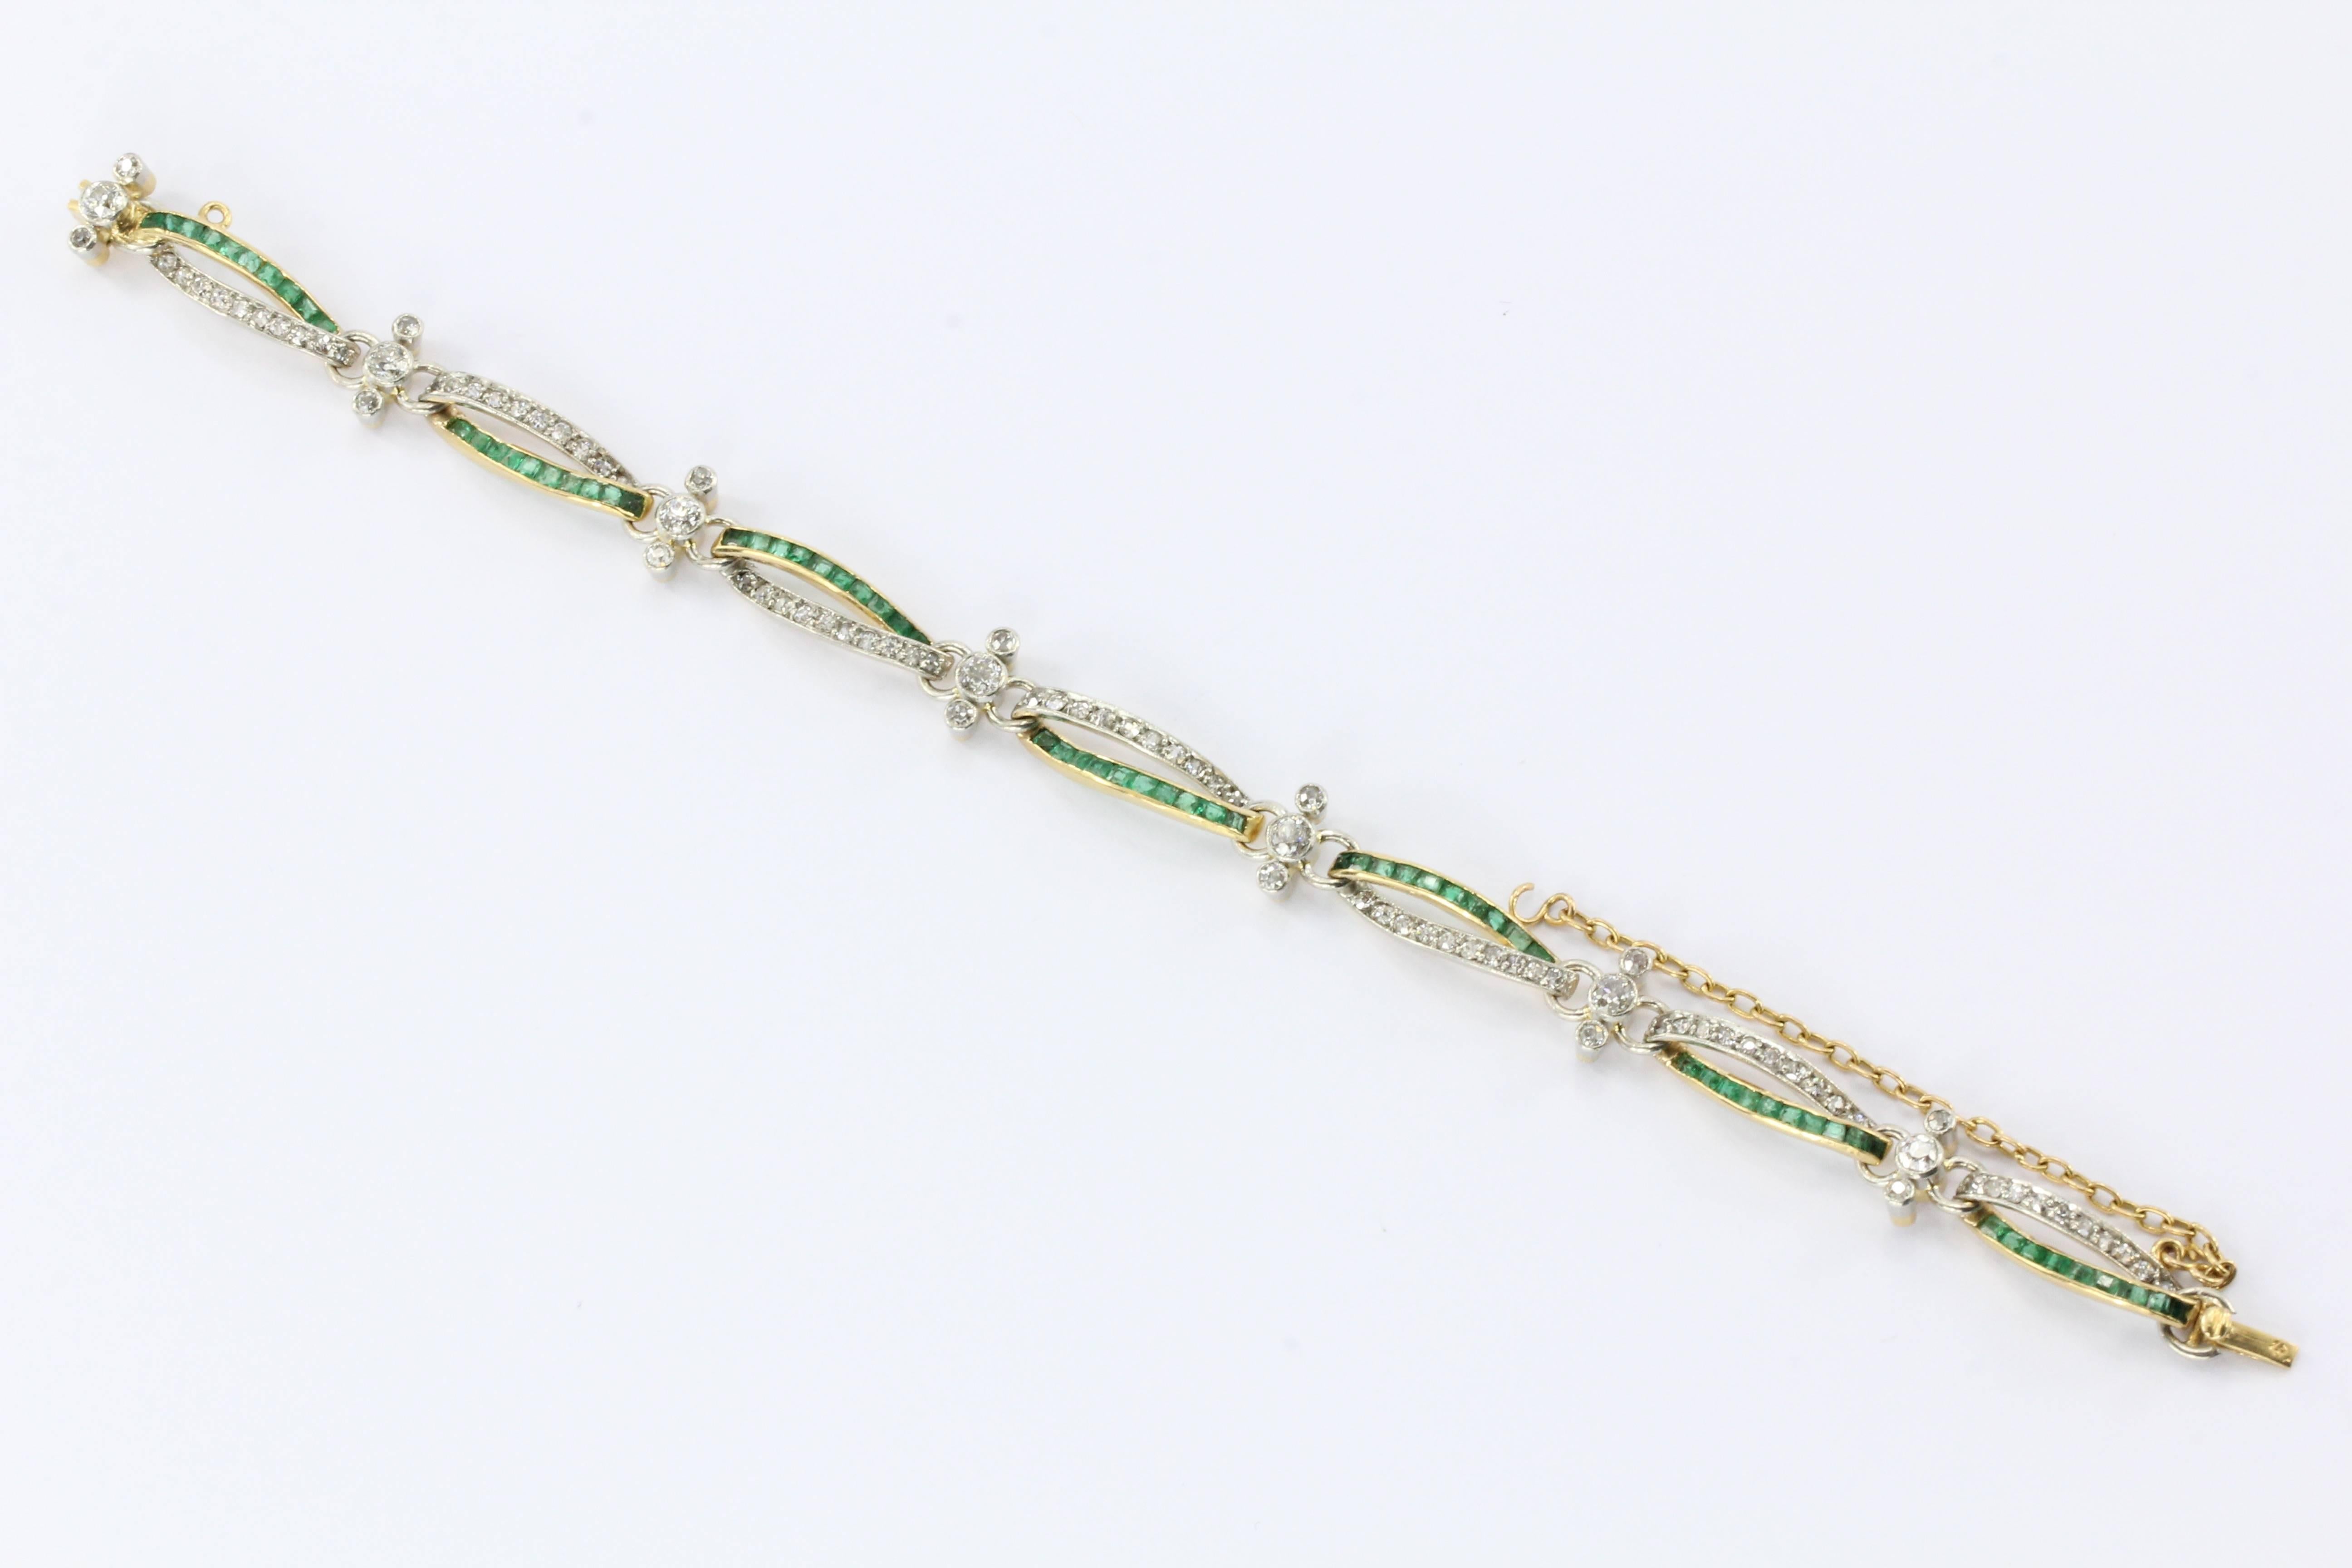 An exquisite Edwardian 18K Yellow Gold with Platinum Top Diamond and Emerald Tennis Bracelet. 

2.5 Carats Total.

Hallmark: 18K

Composition: 18K Yellow Gold/Diamond/ Natural Emerald/Platinum Top

Primary Stone: Diamond (91)

Color: H-J

Clarity: